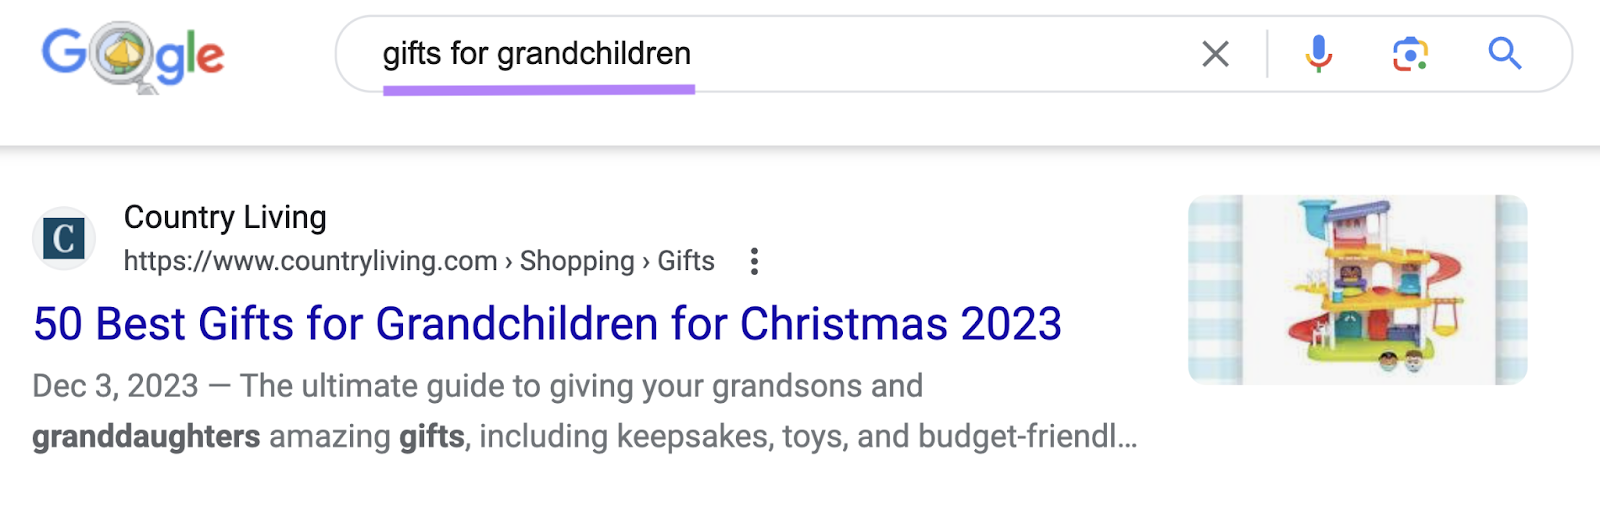 Google's first search result for "gifts for grandchildren" query